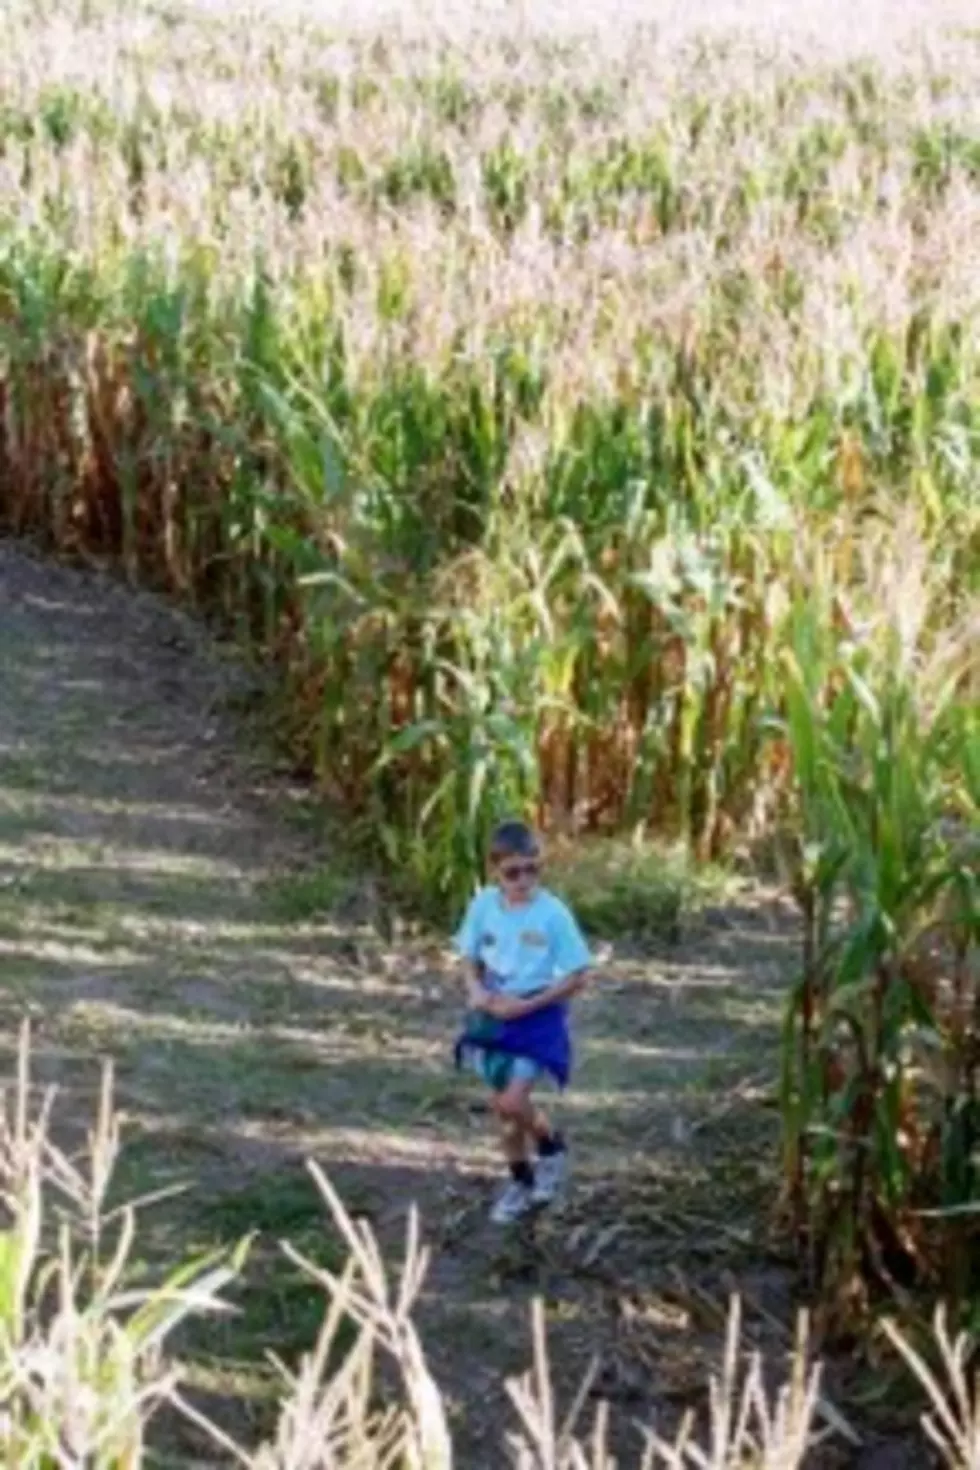 Cornfield Maze To Open October 10th